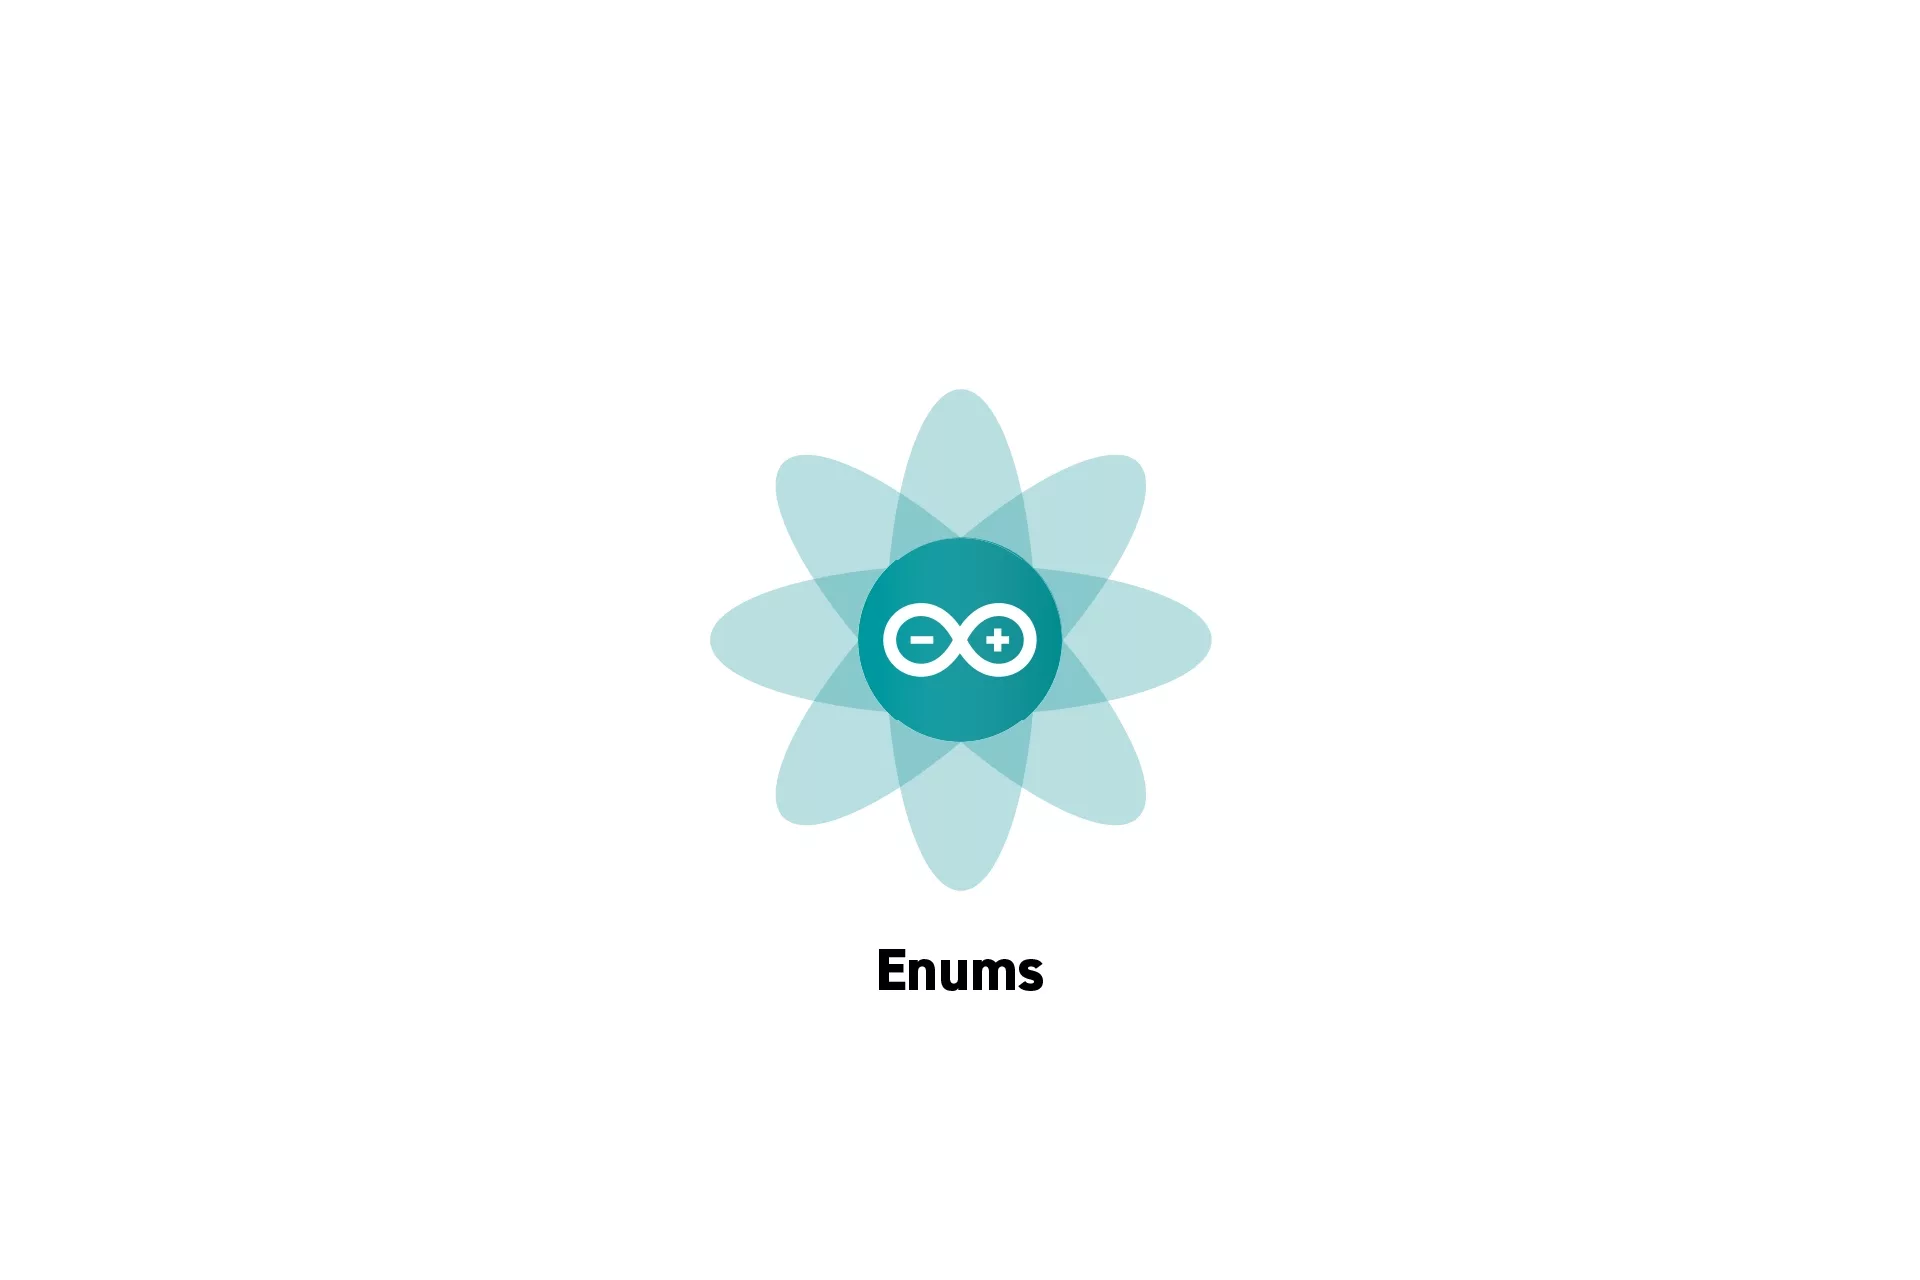 A flower that represents Arduino with the text "Enums" beneath it.